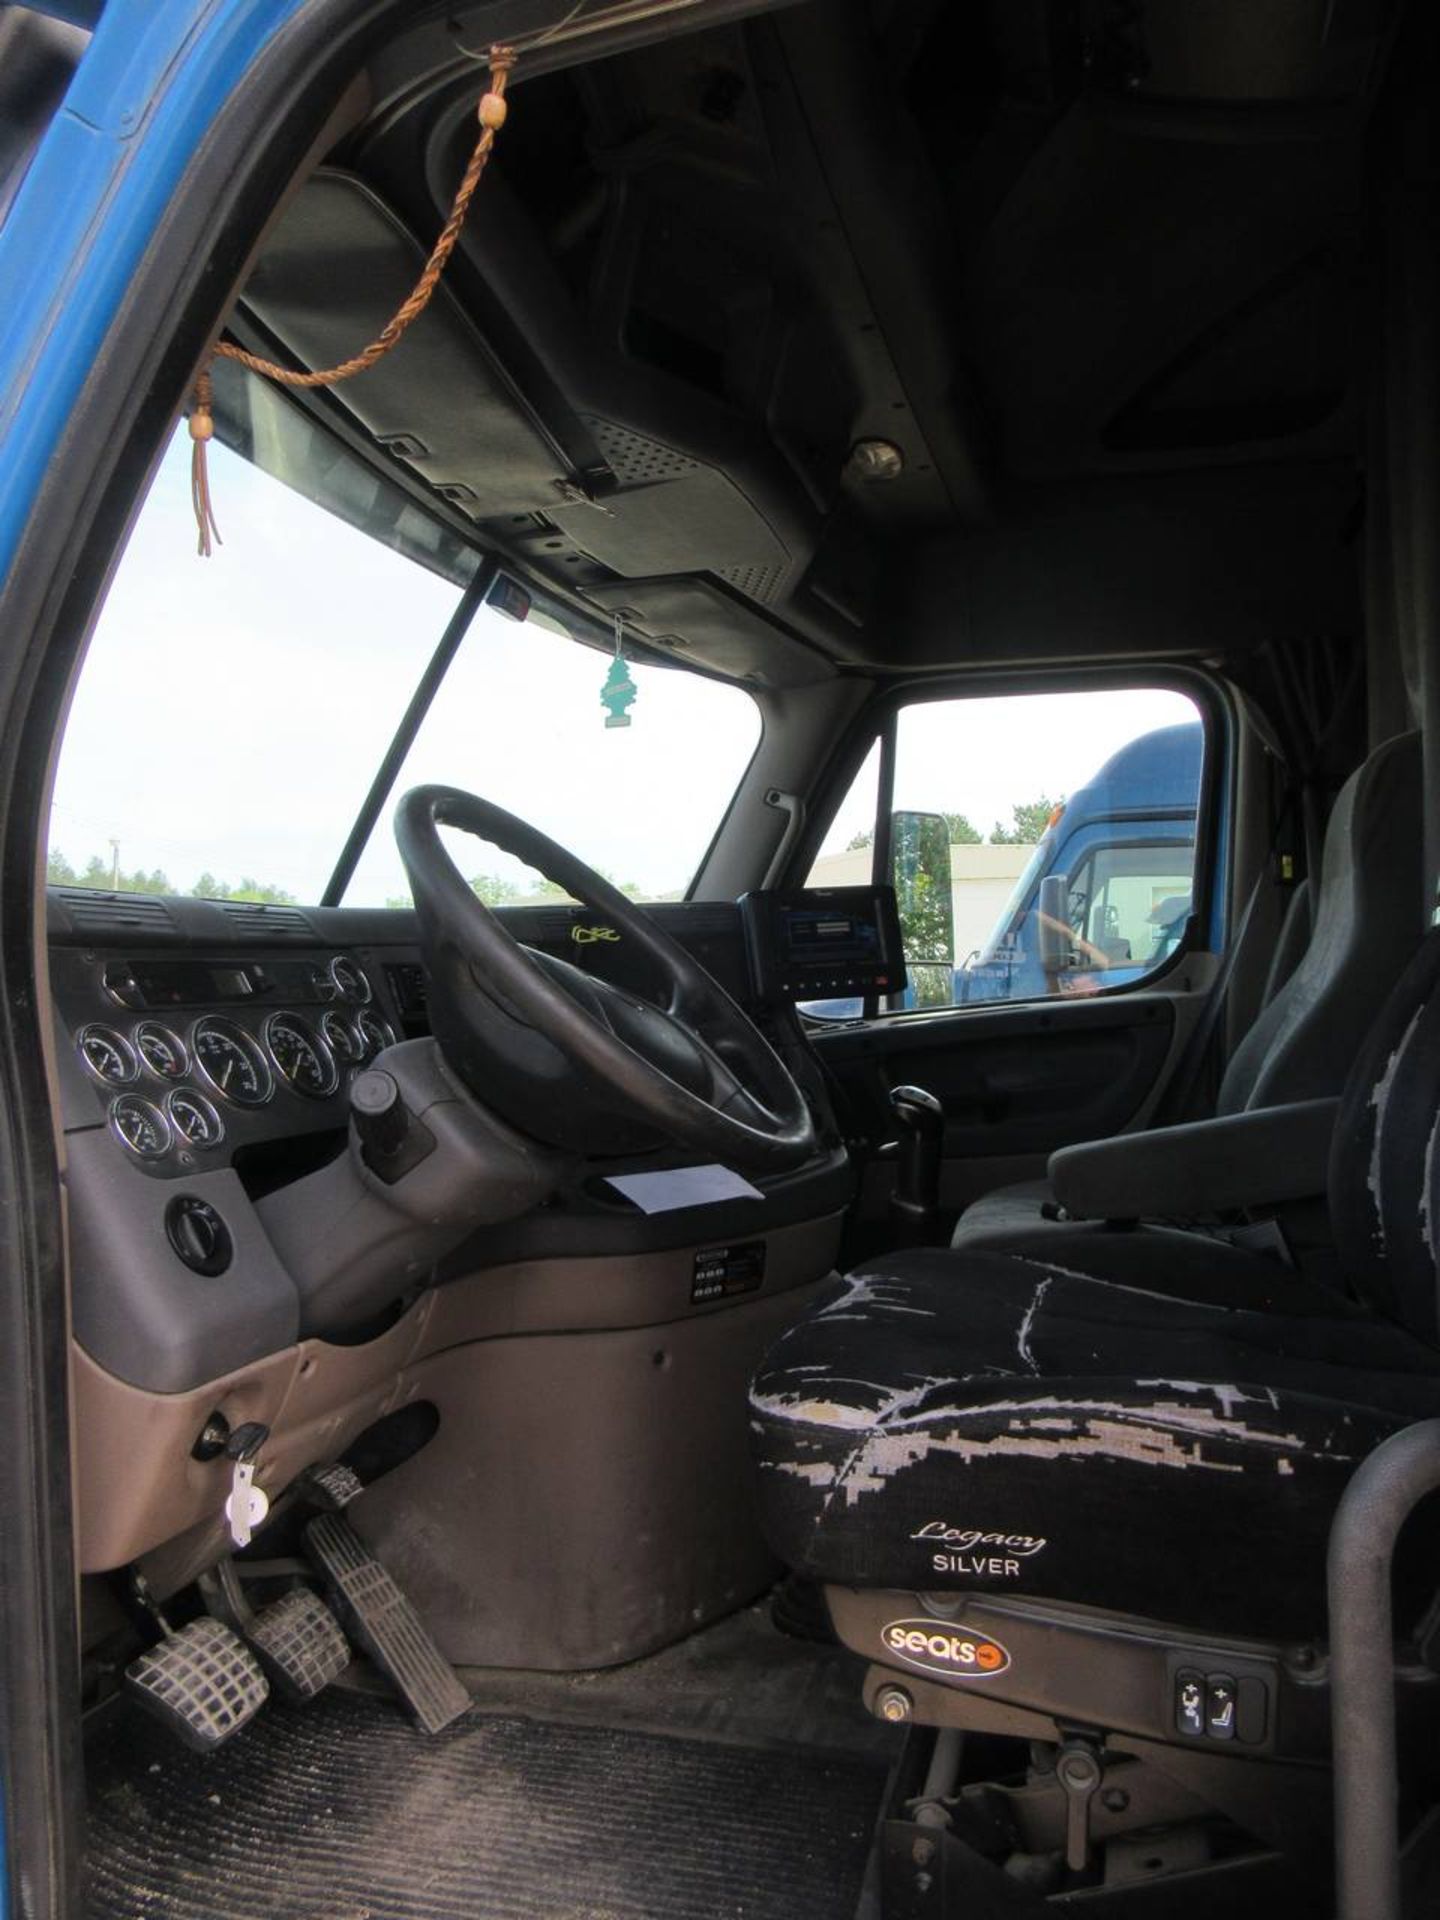 2012 Freightliner Cascadia Tractor - Image 7 of 10